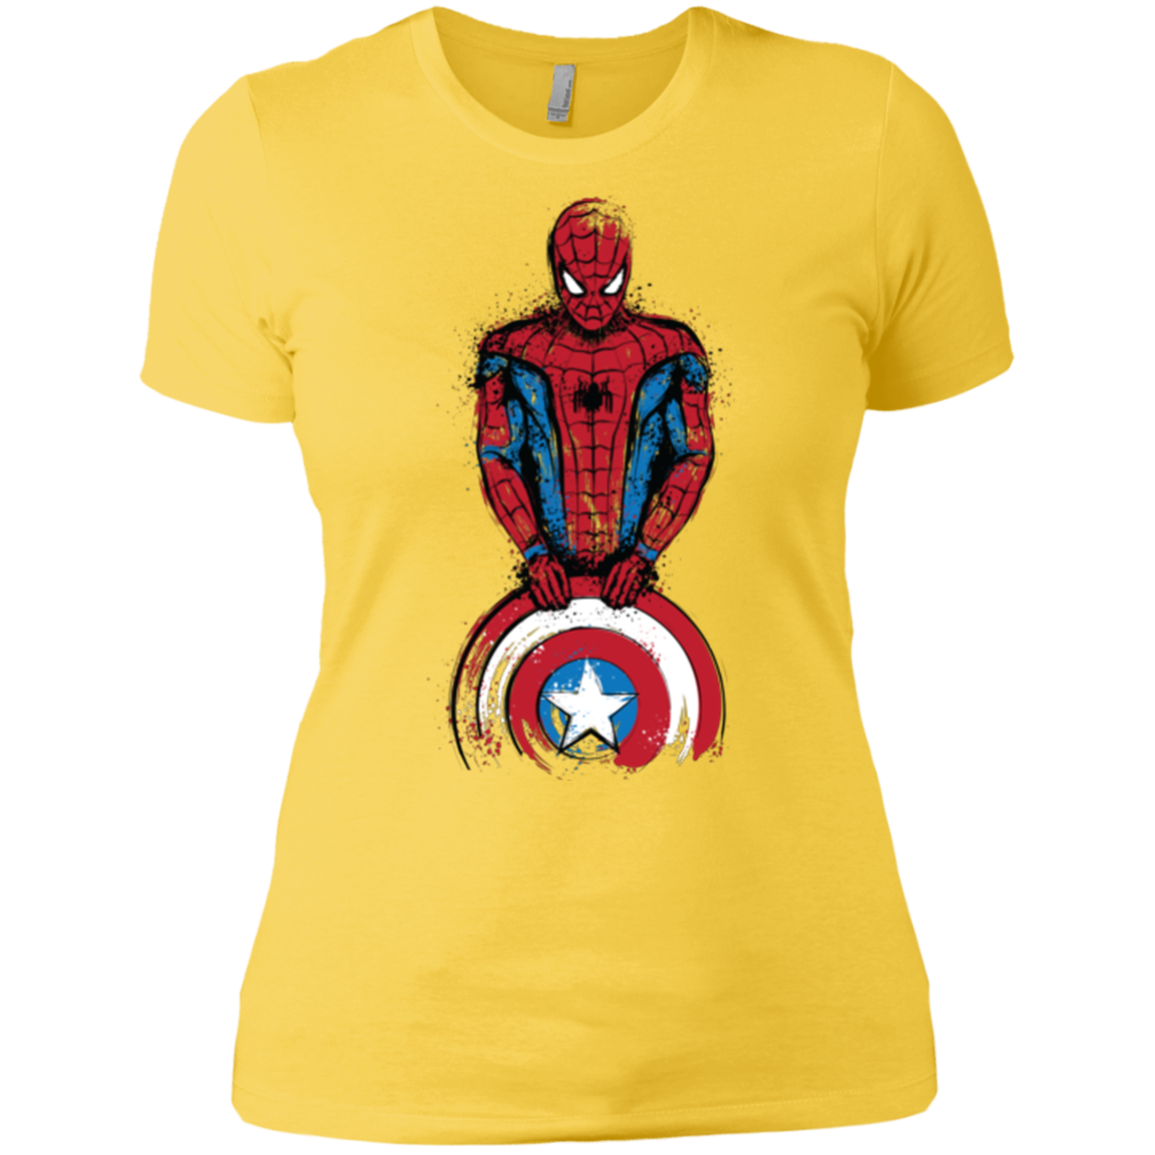 The Spider is Coming Women's Premium T-Shirt